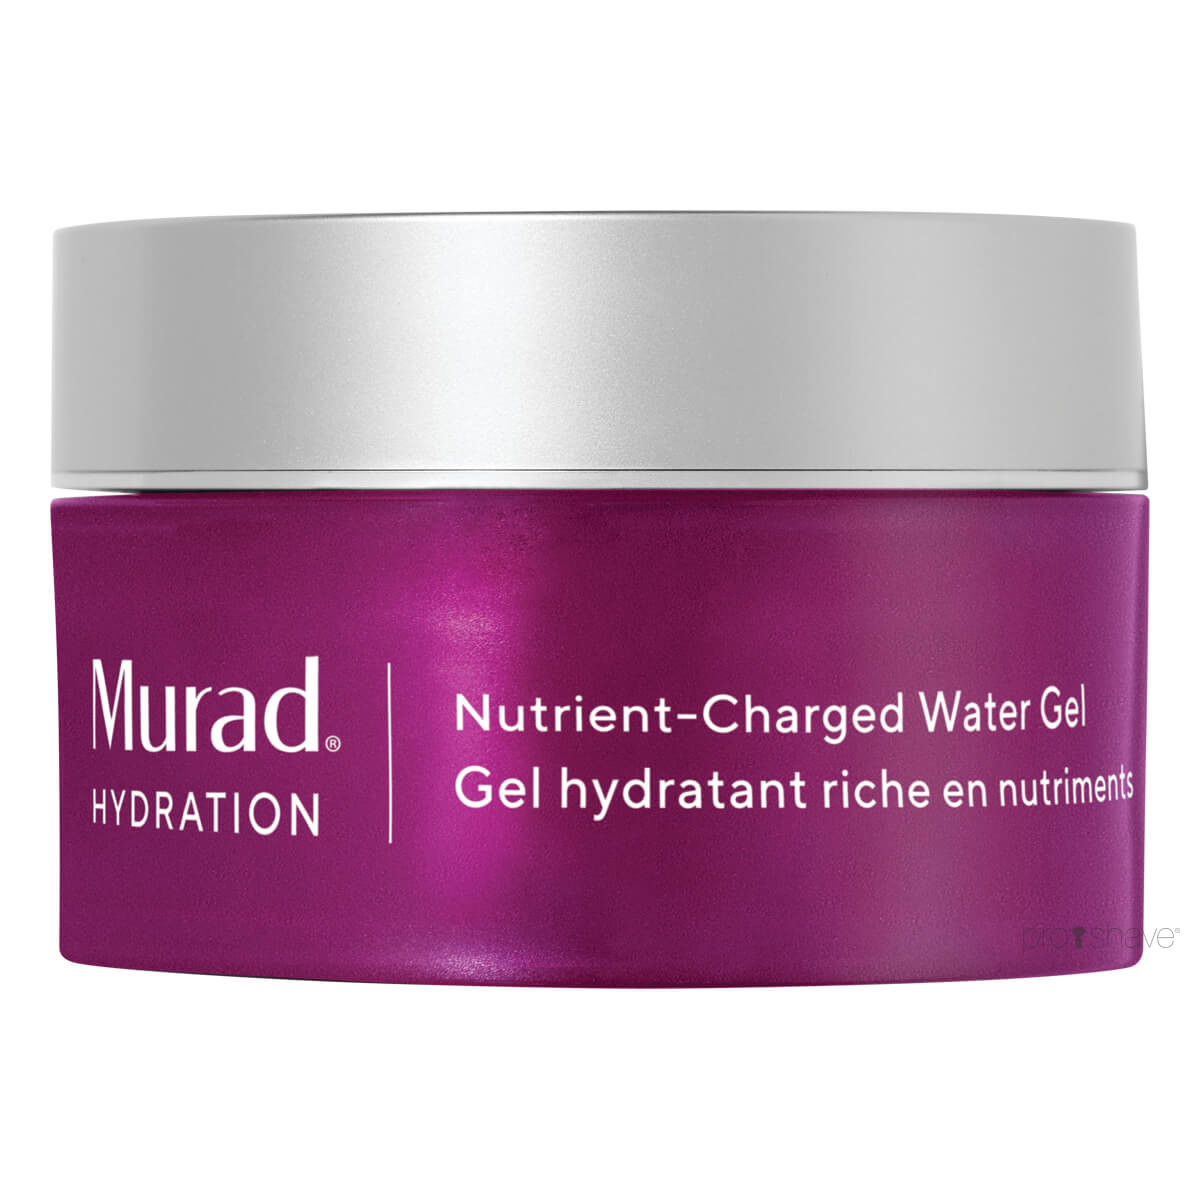 Murad Nutrient-Charged Water Gel, Hydration, 50 ml.